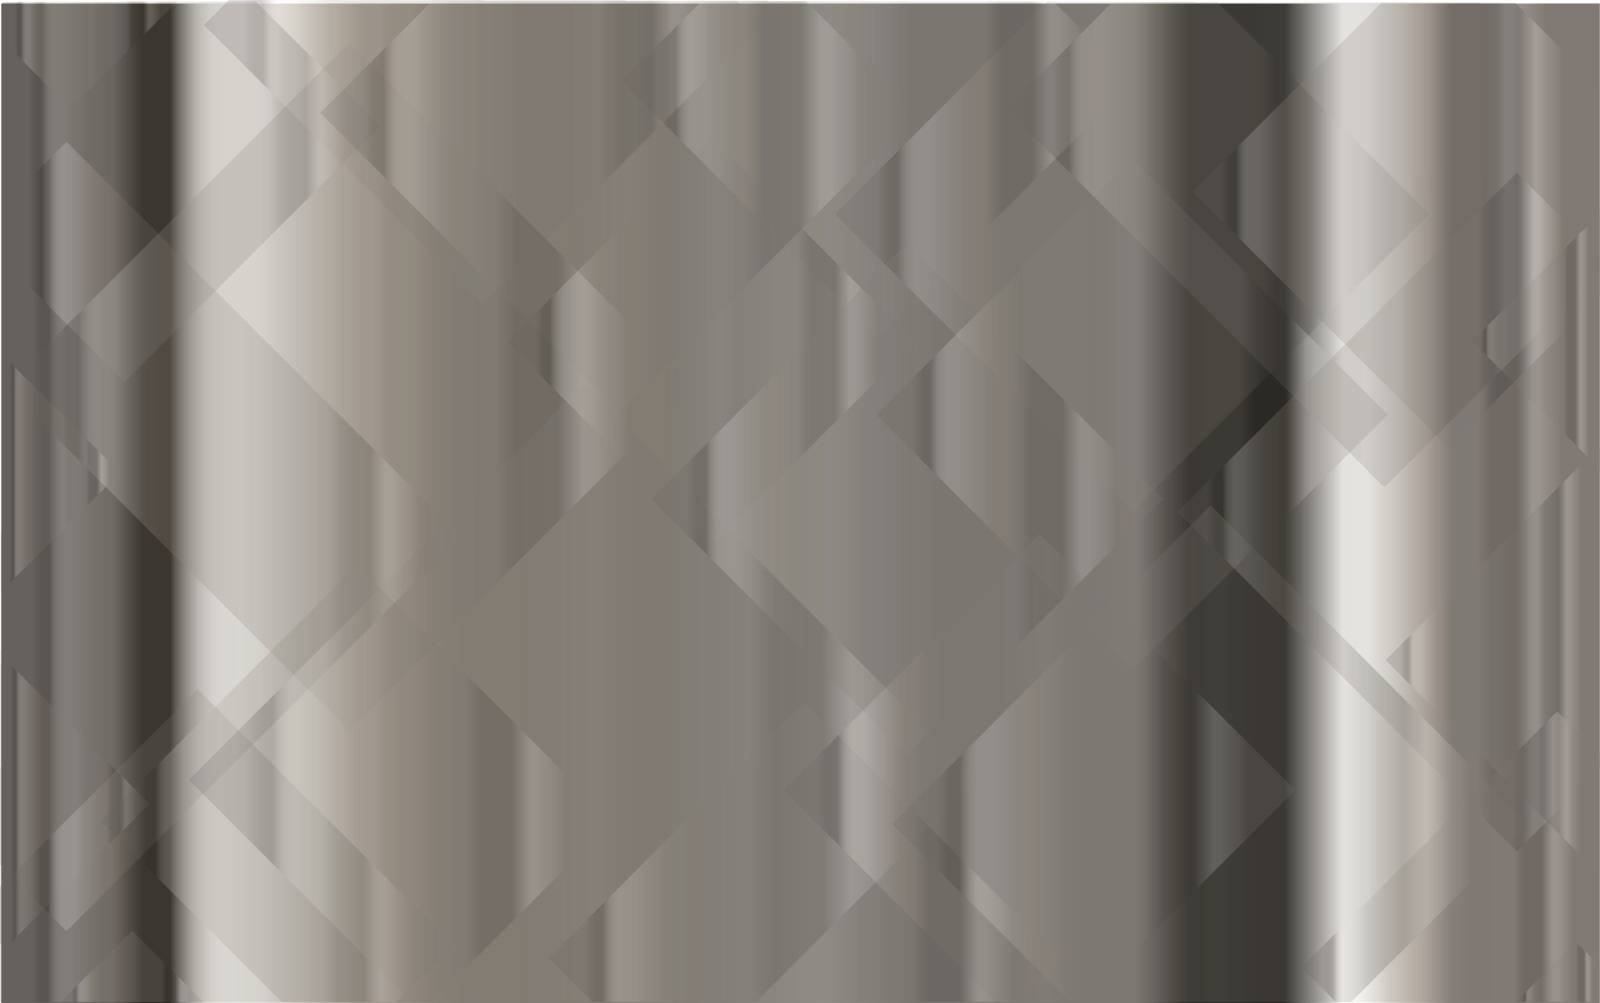 A background of faded silver squares overlapping each other